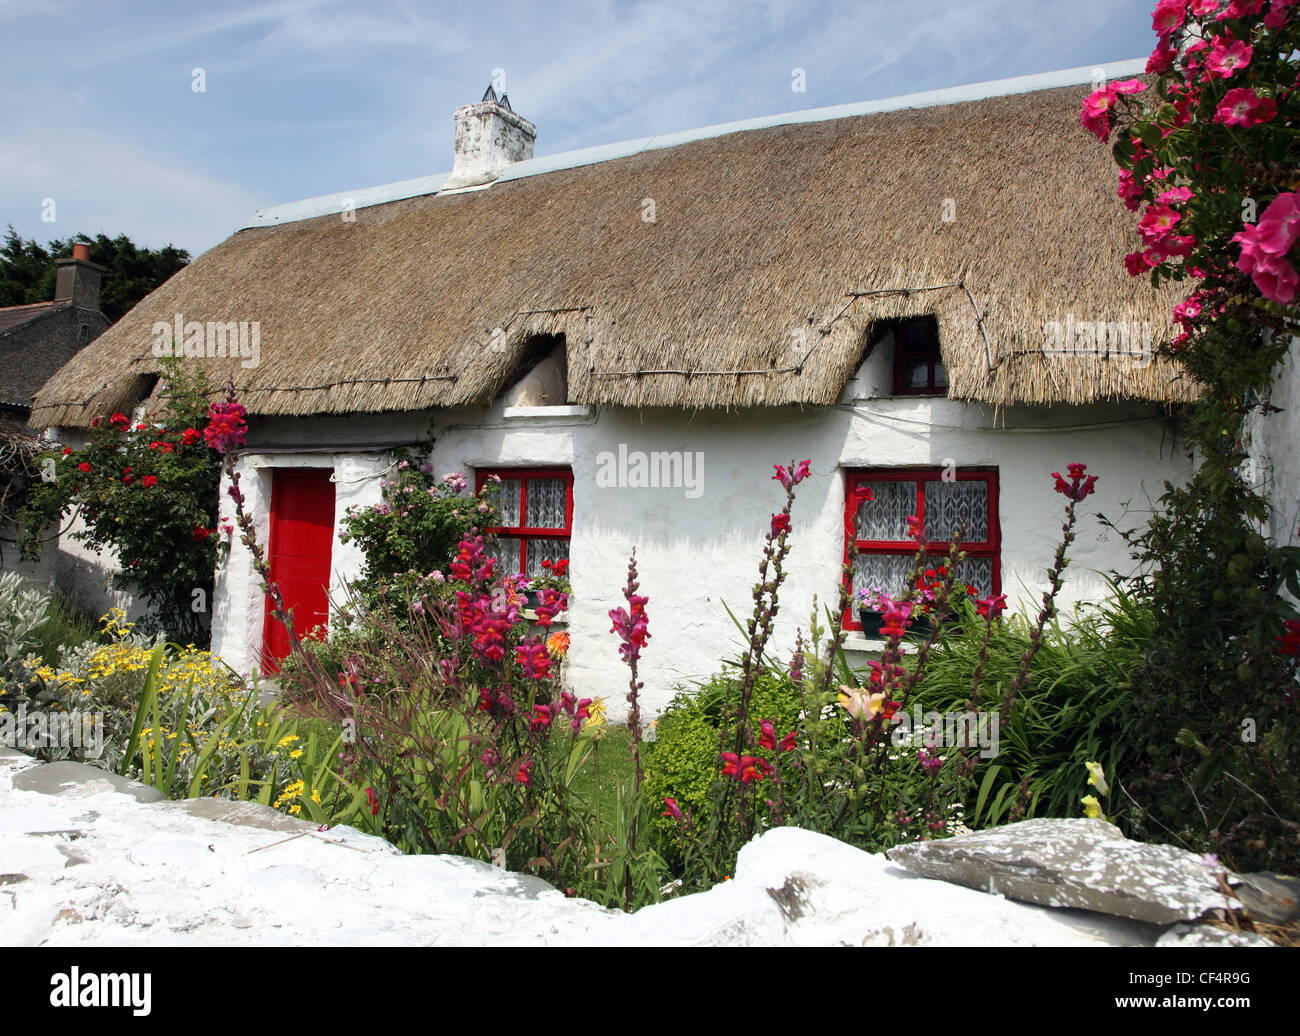 Thatched cottage at Clogherhead, a small fishing village by the Irish sea on the Clogherhead Peninsula, a National Heritage Area Stock Photo